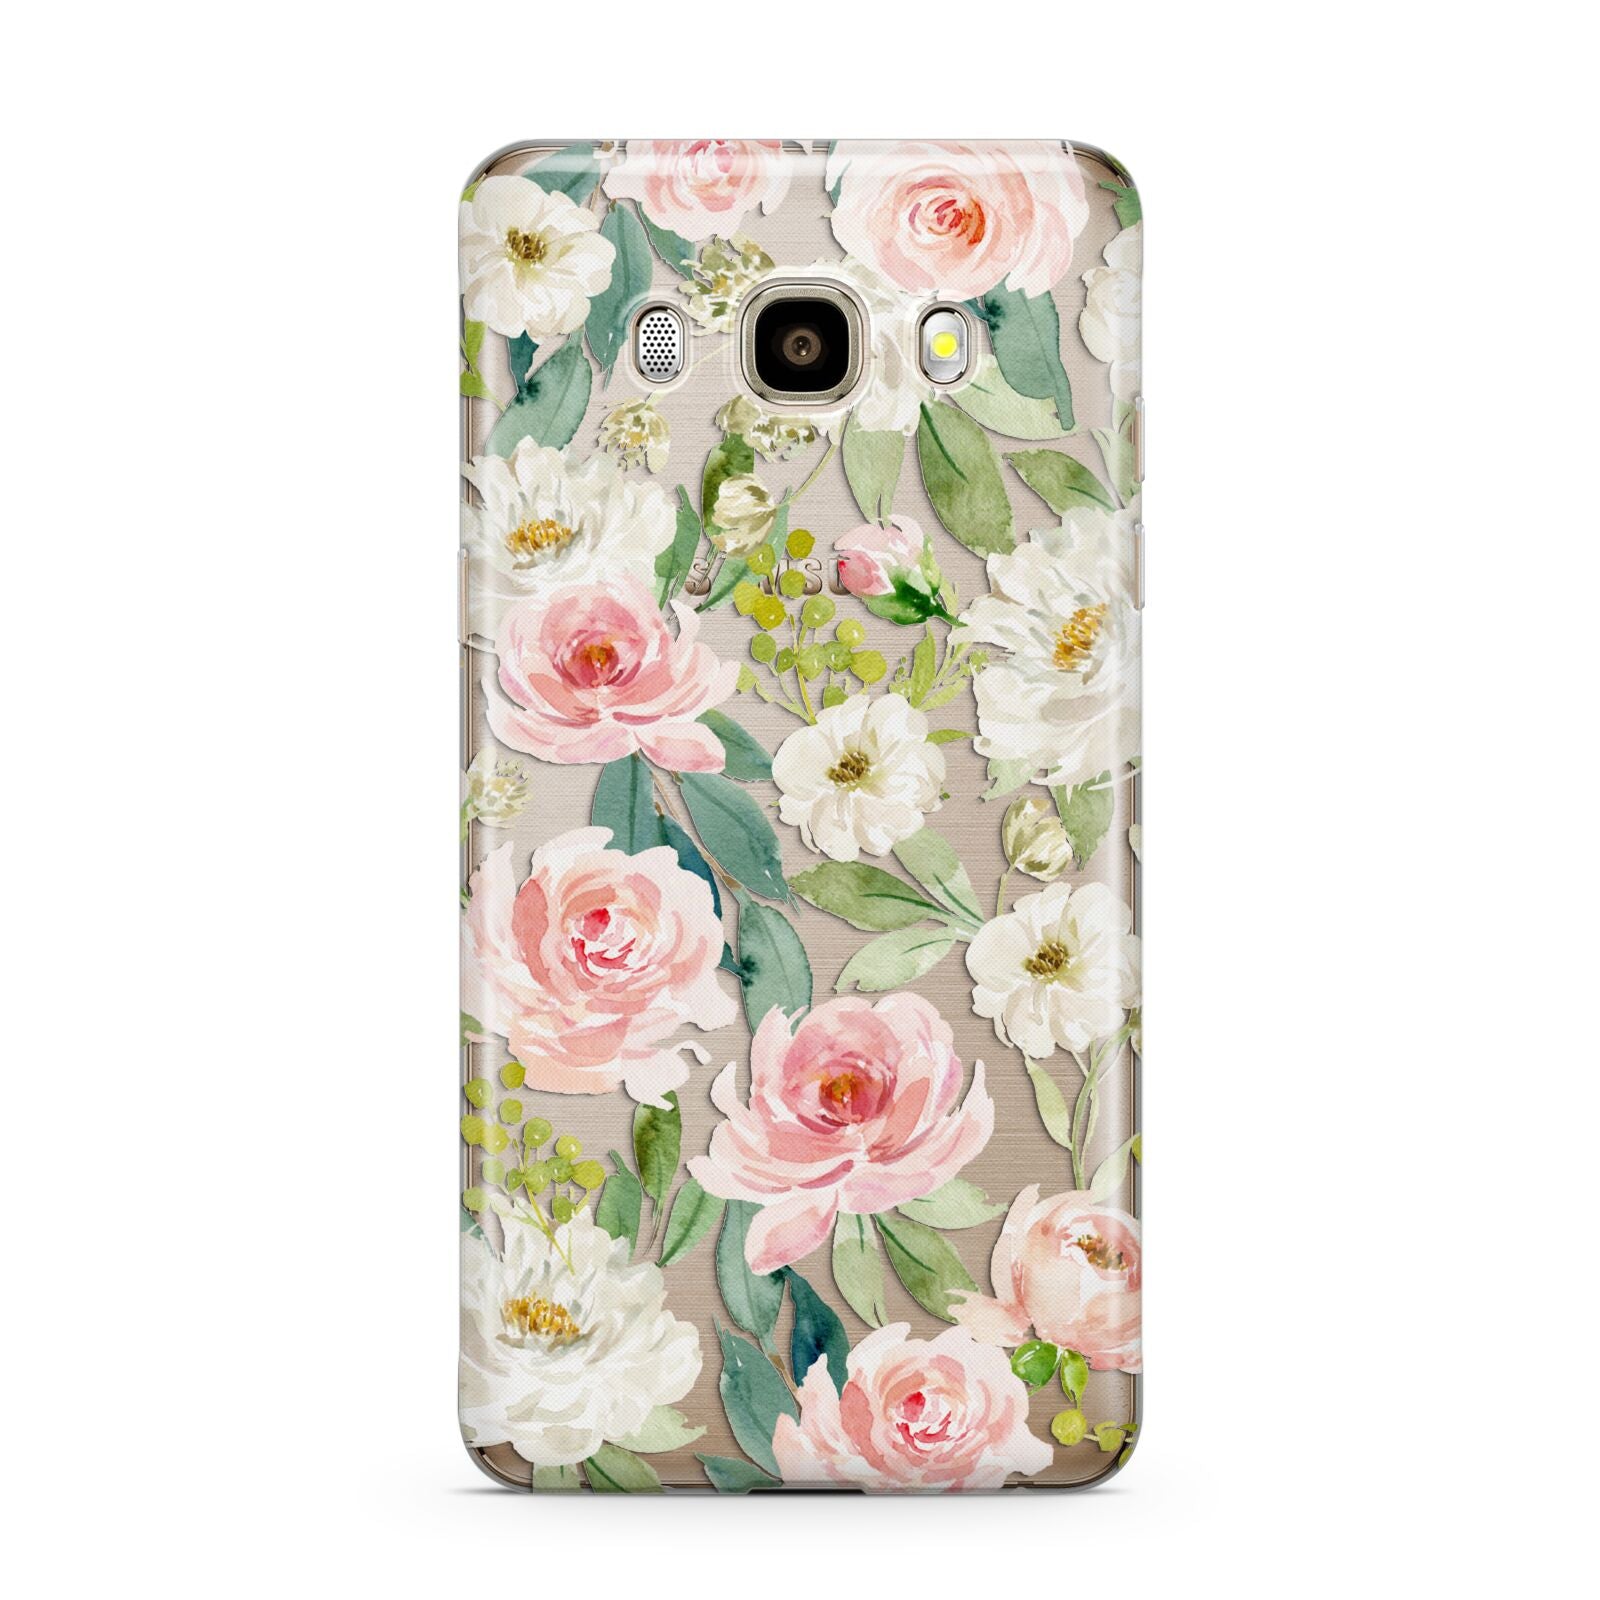 Watercolour Peonies Roses and Foliage Samsung Galaxy J7 2016 Case on gold phone